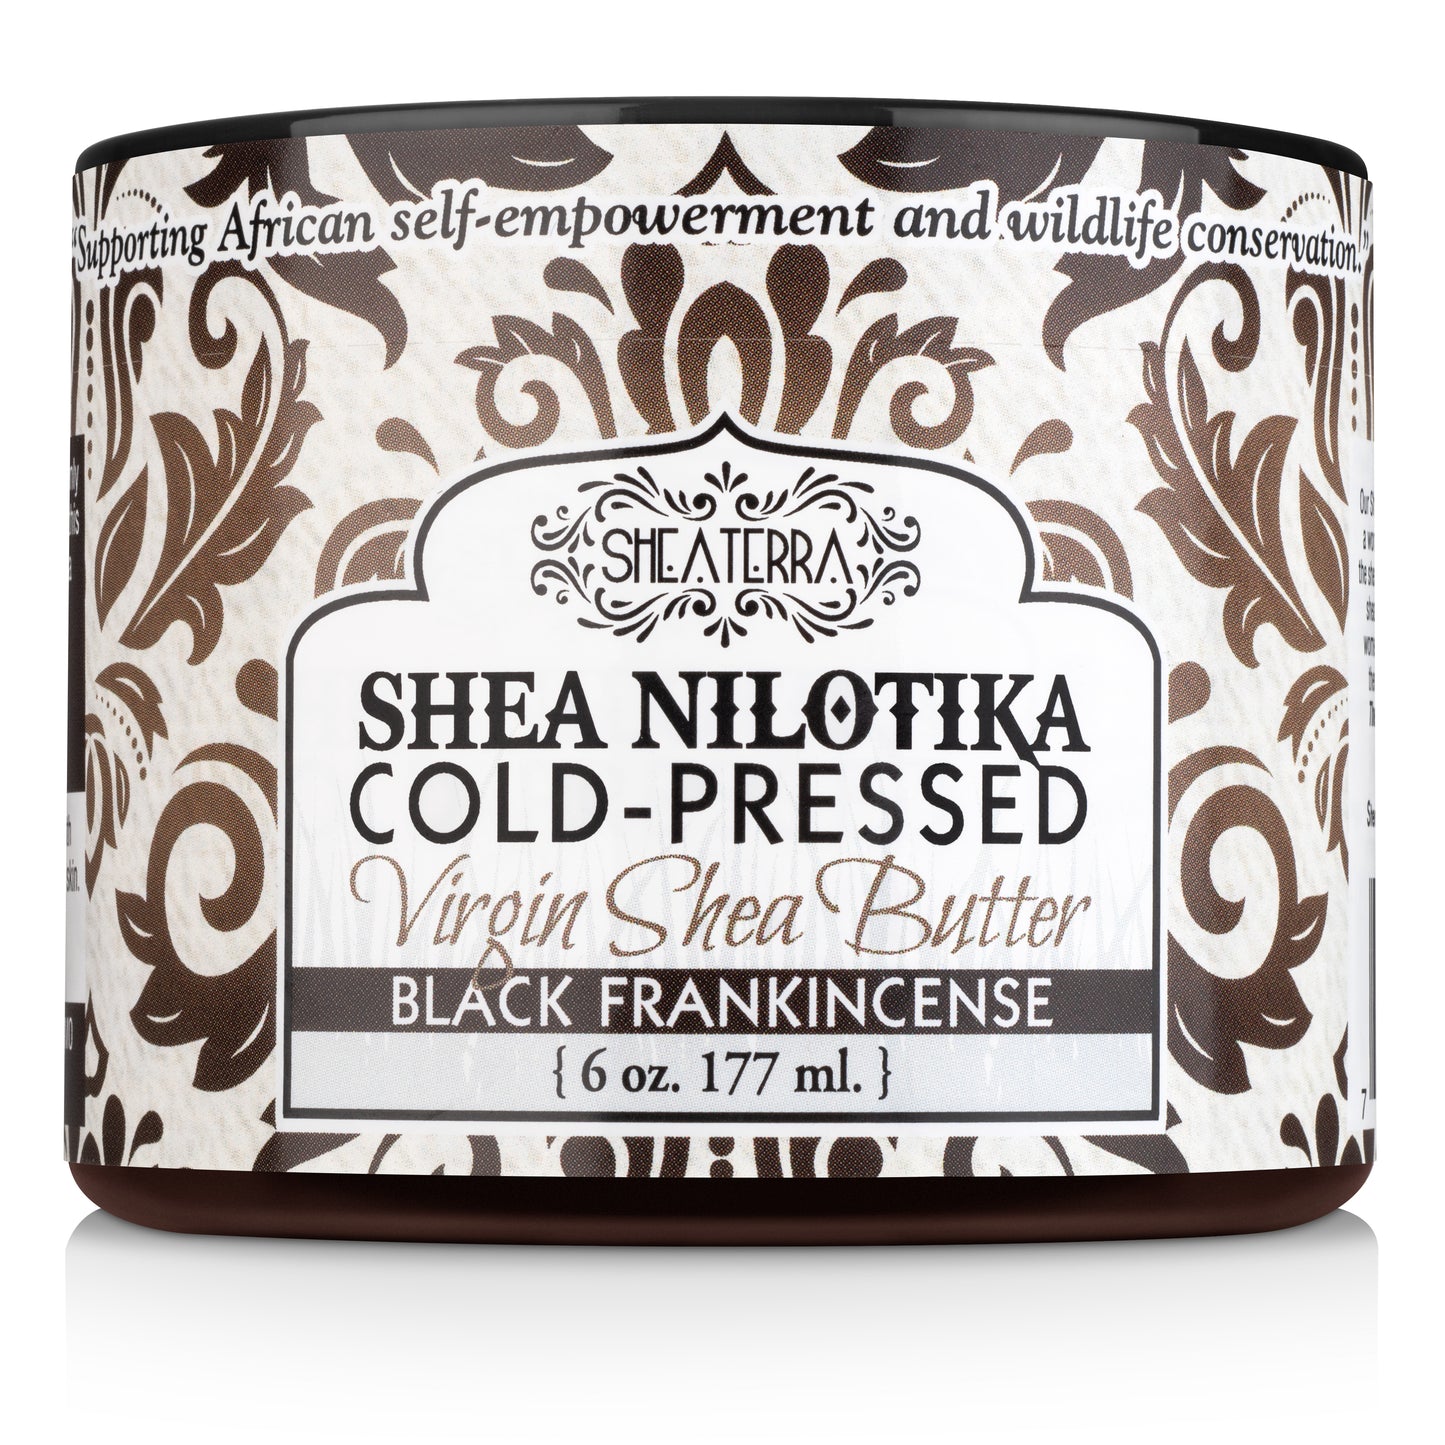 100% Pure Cold Pressed Virgin Shea Butter